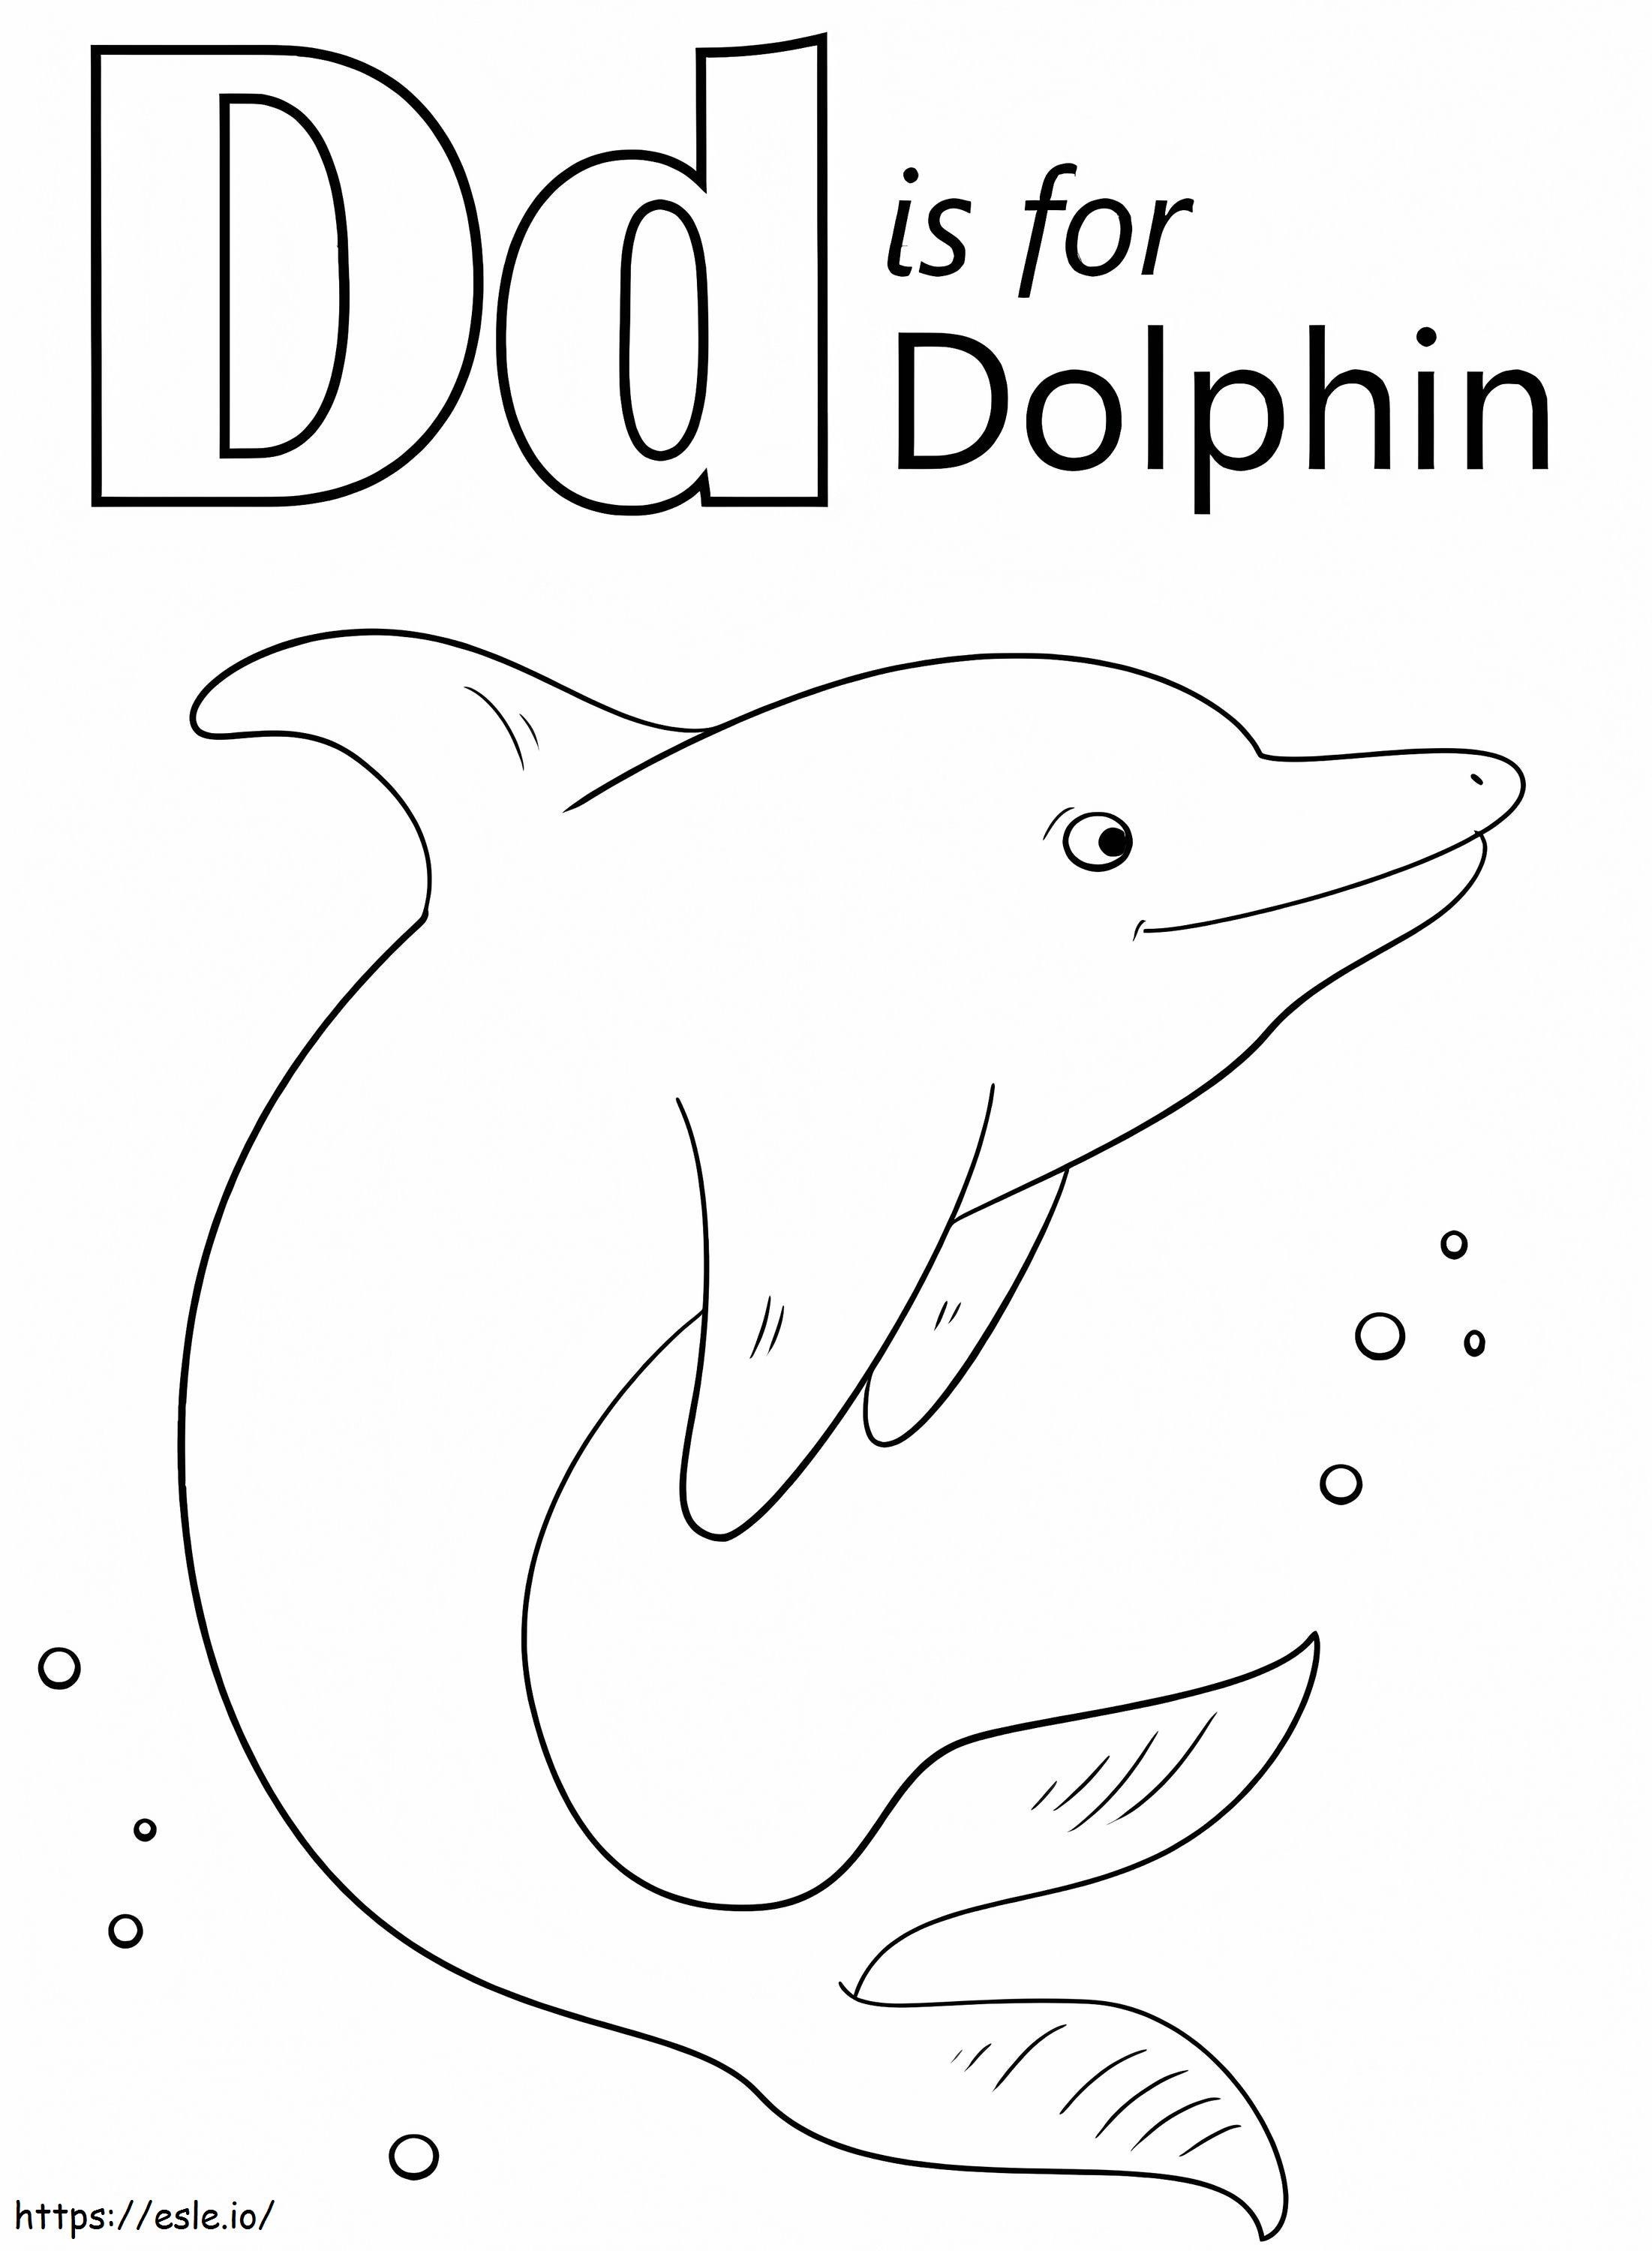 Dolphin Letter D 1 coloring page